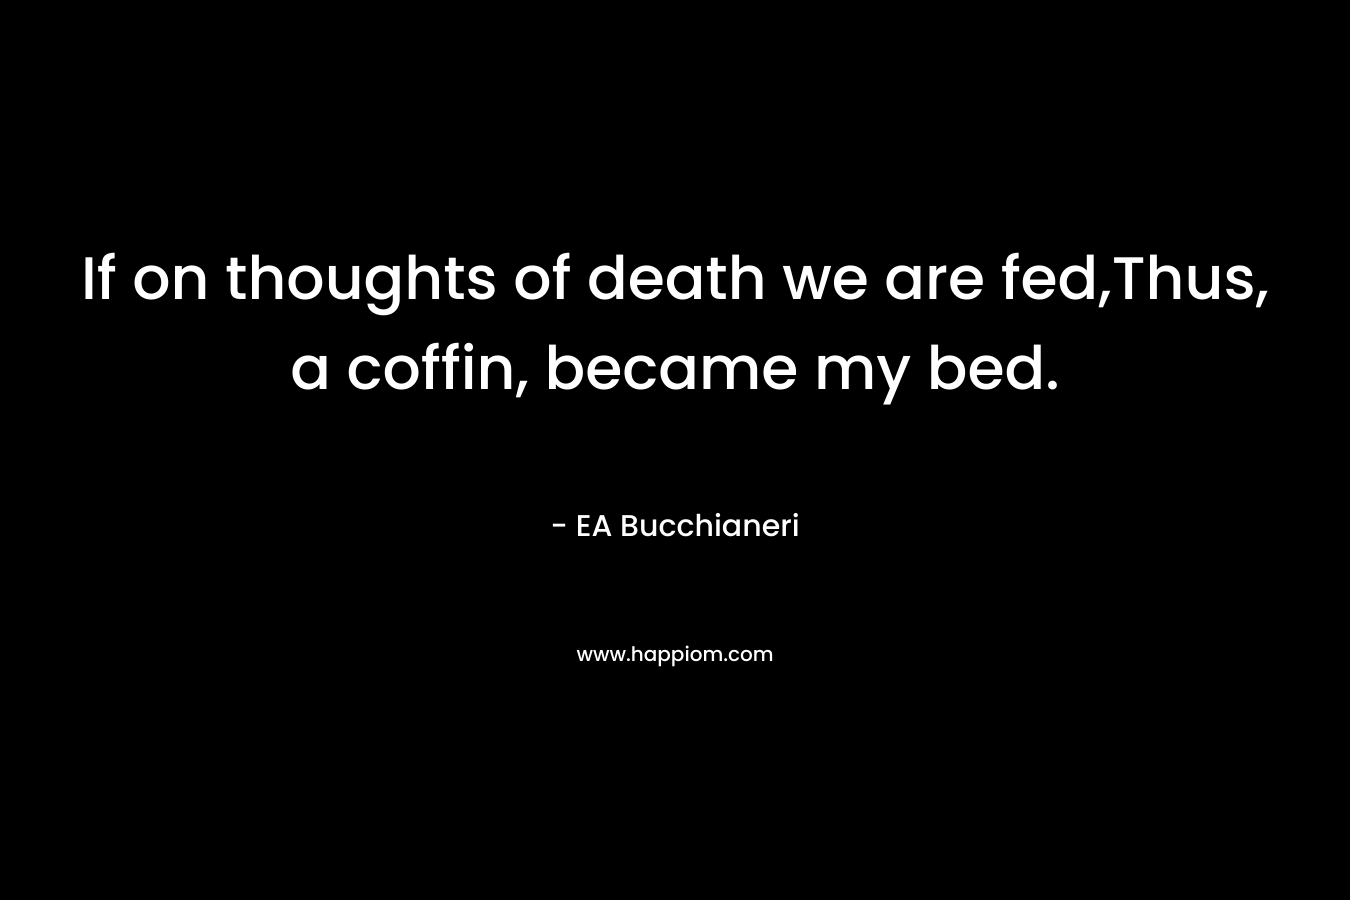 If on thoughts of death we are fed,Thus, a coffin, became my bed.